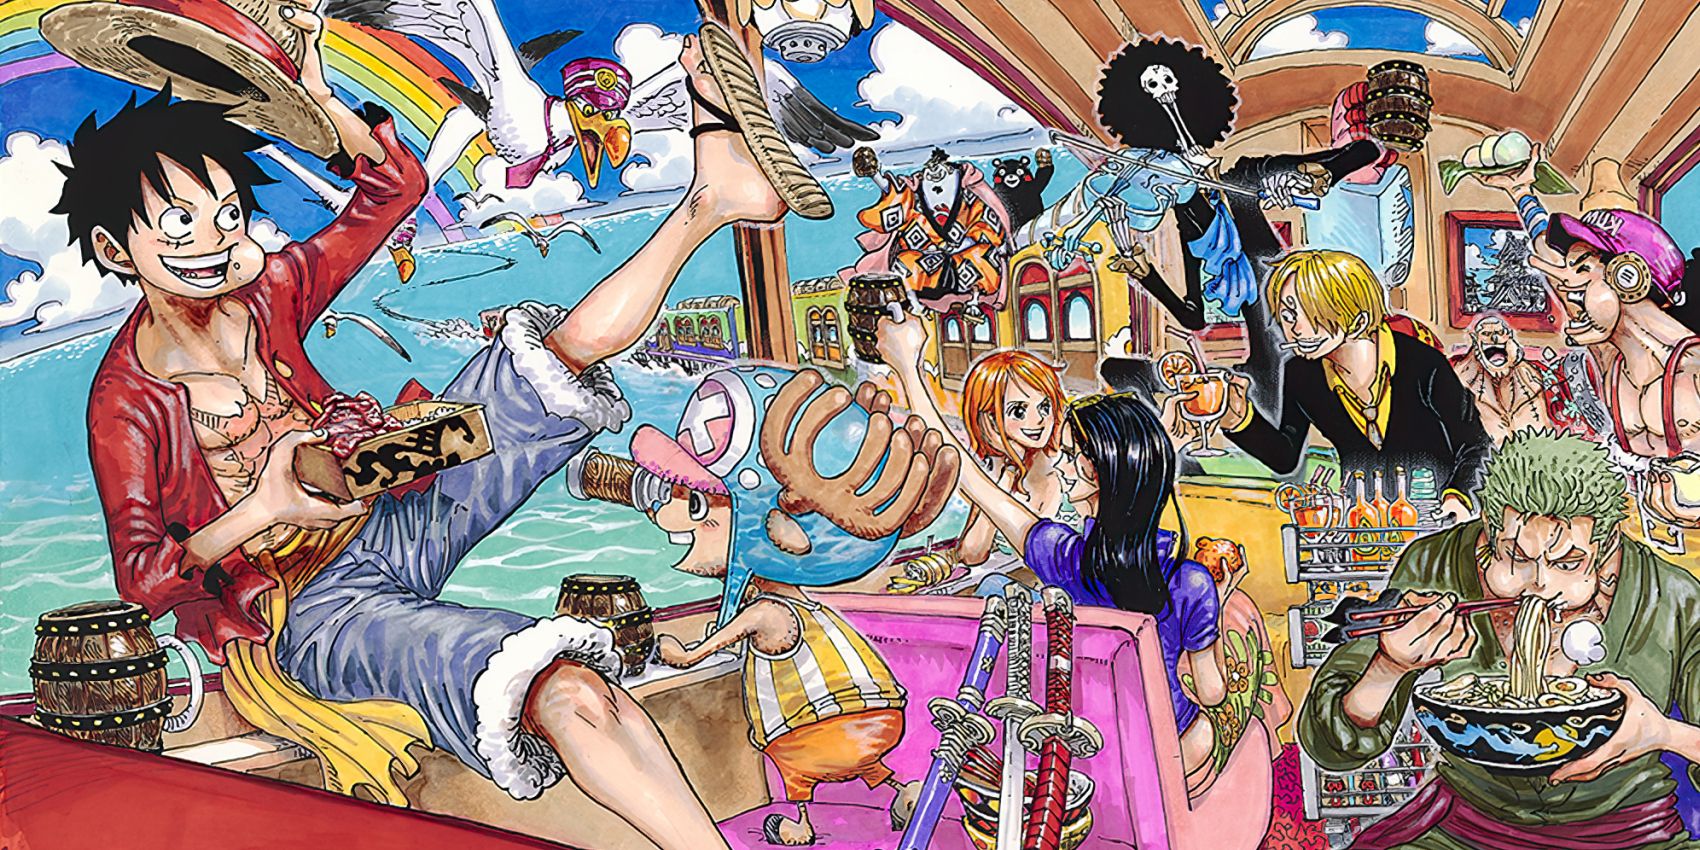 Screenshot of One Piece color spread from manga chapter 992 shows the Luffy and the Straw hat crew enjoying a lunch on a sea train.